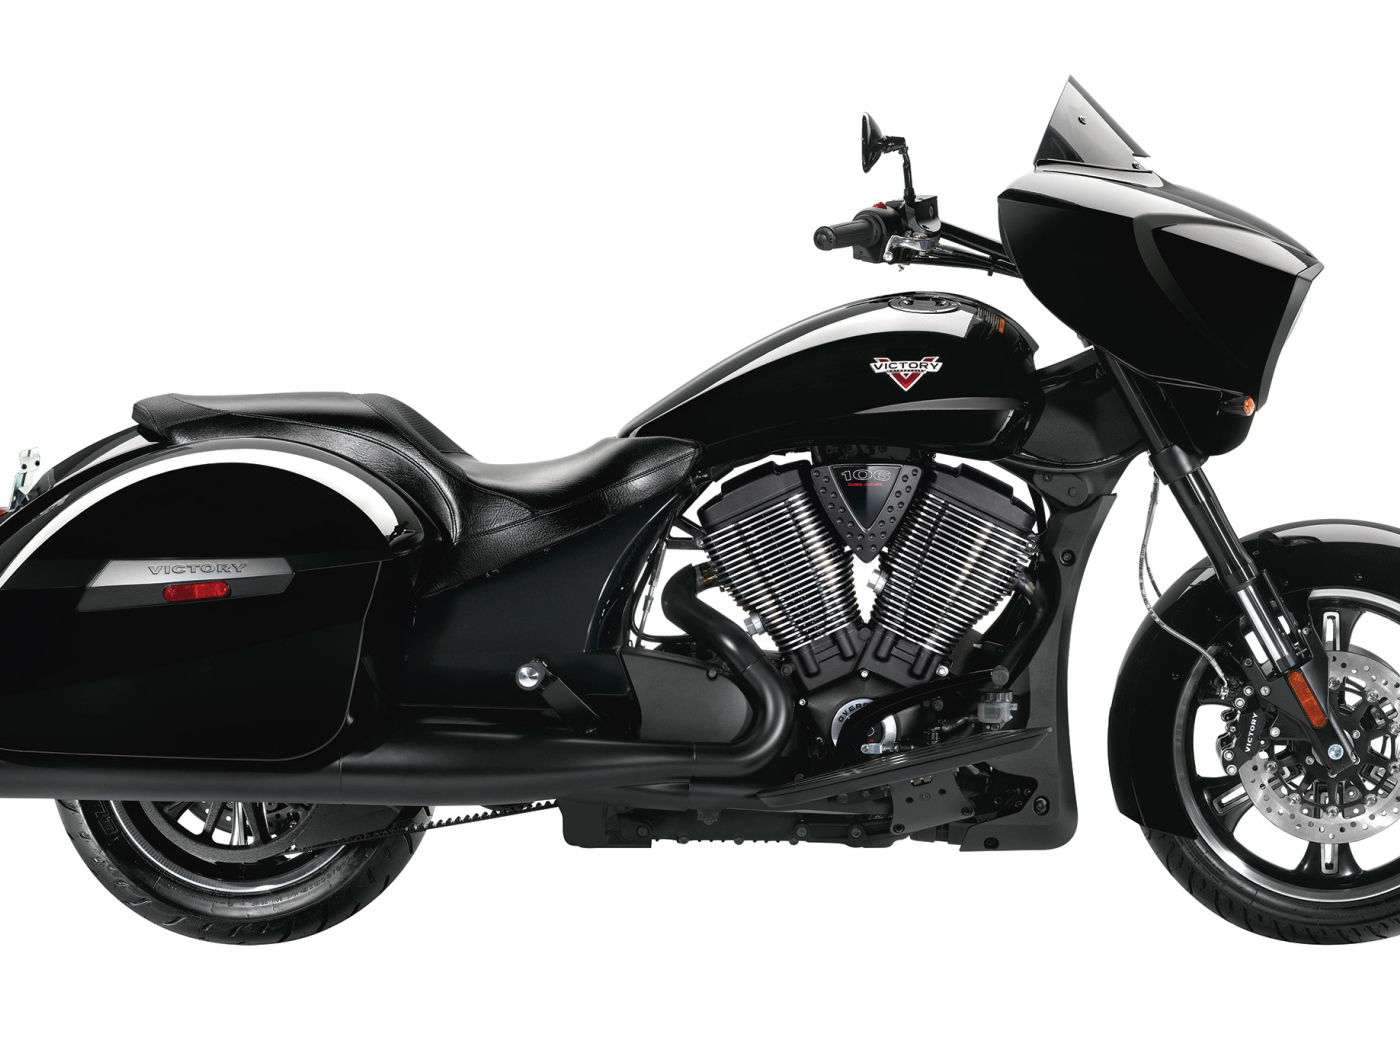 Black electric motorcycle Brutus V9, 2021 on a white background